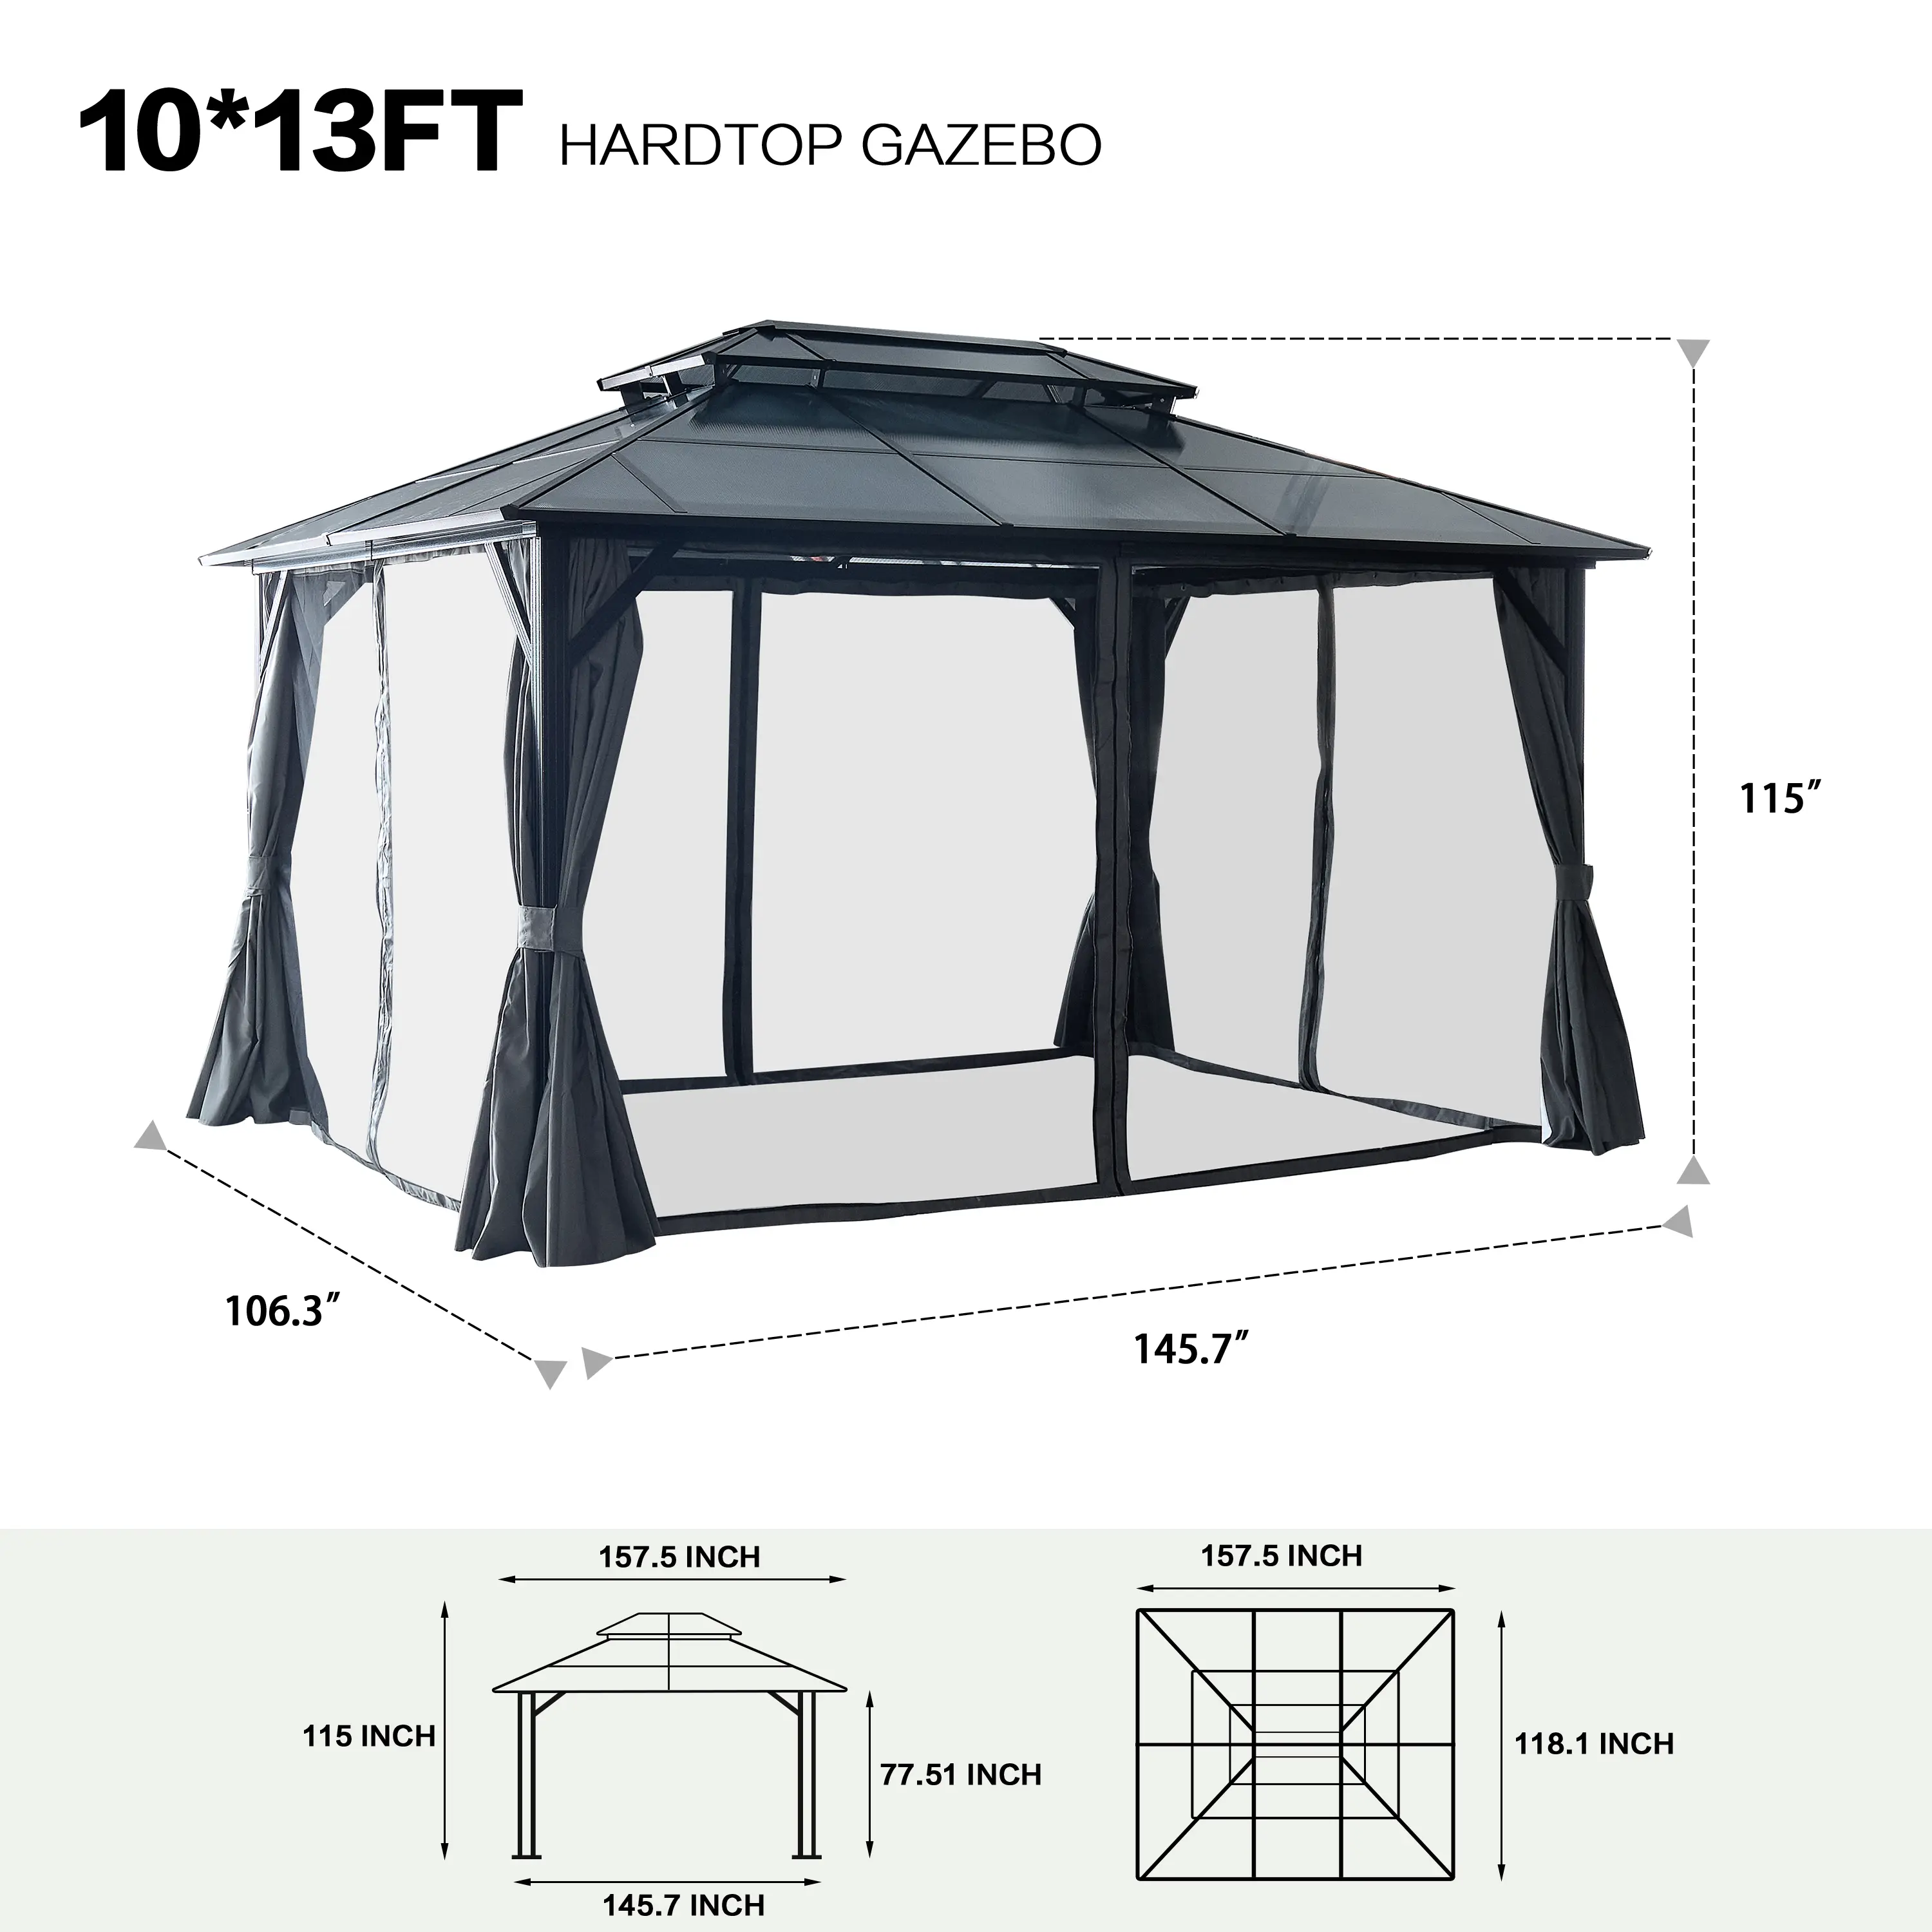 10'x13' Hardtop Gazebo Outdoor Aluminum Frame Permanent Pavilion Double Roof Canopy with Curtains and Netting